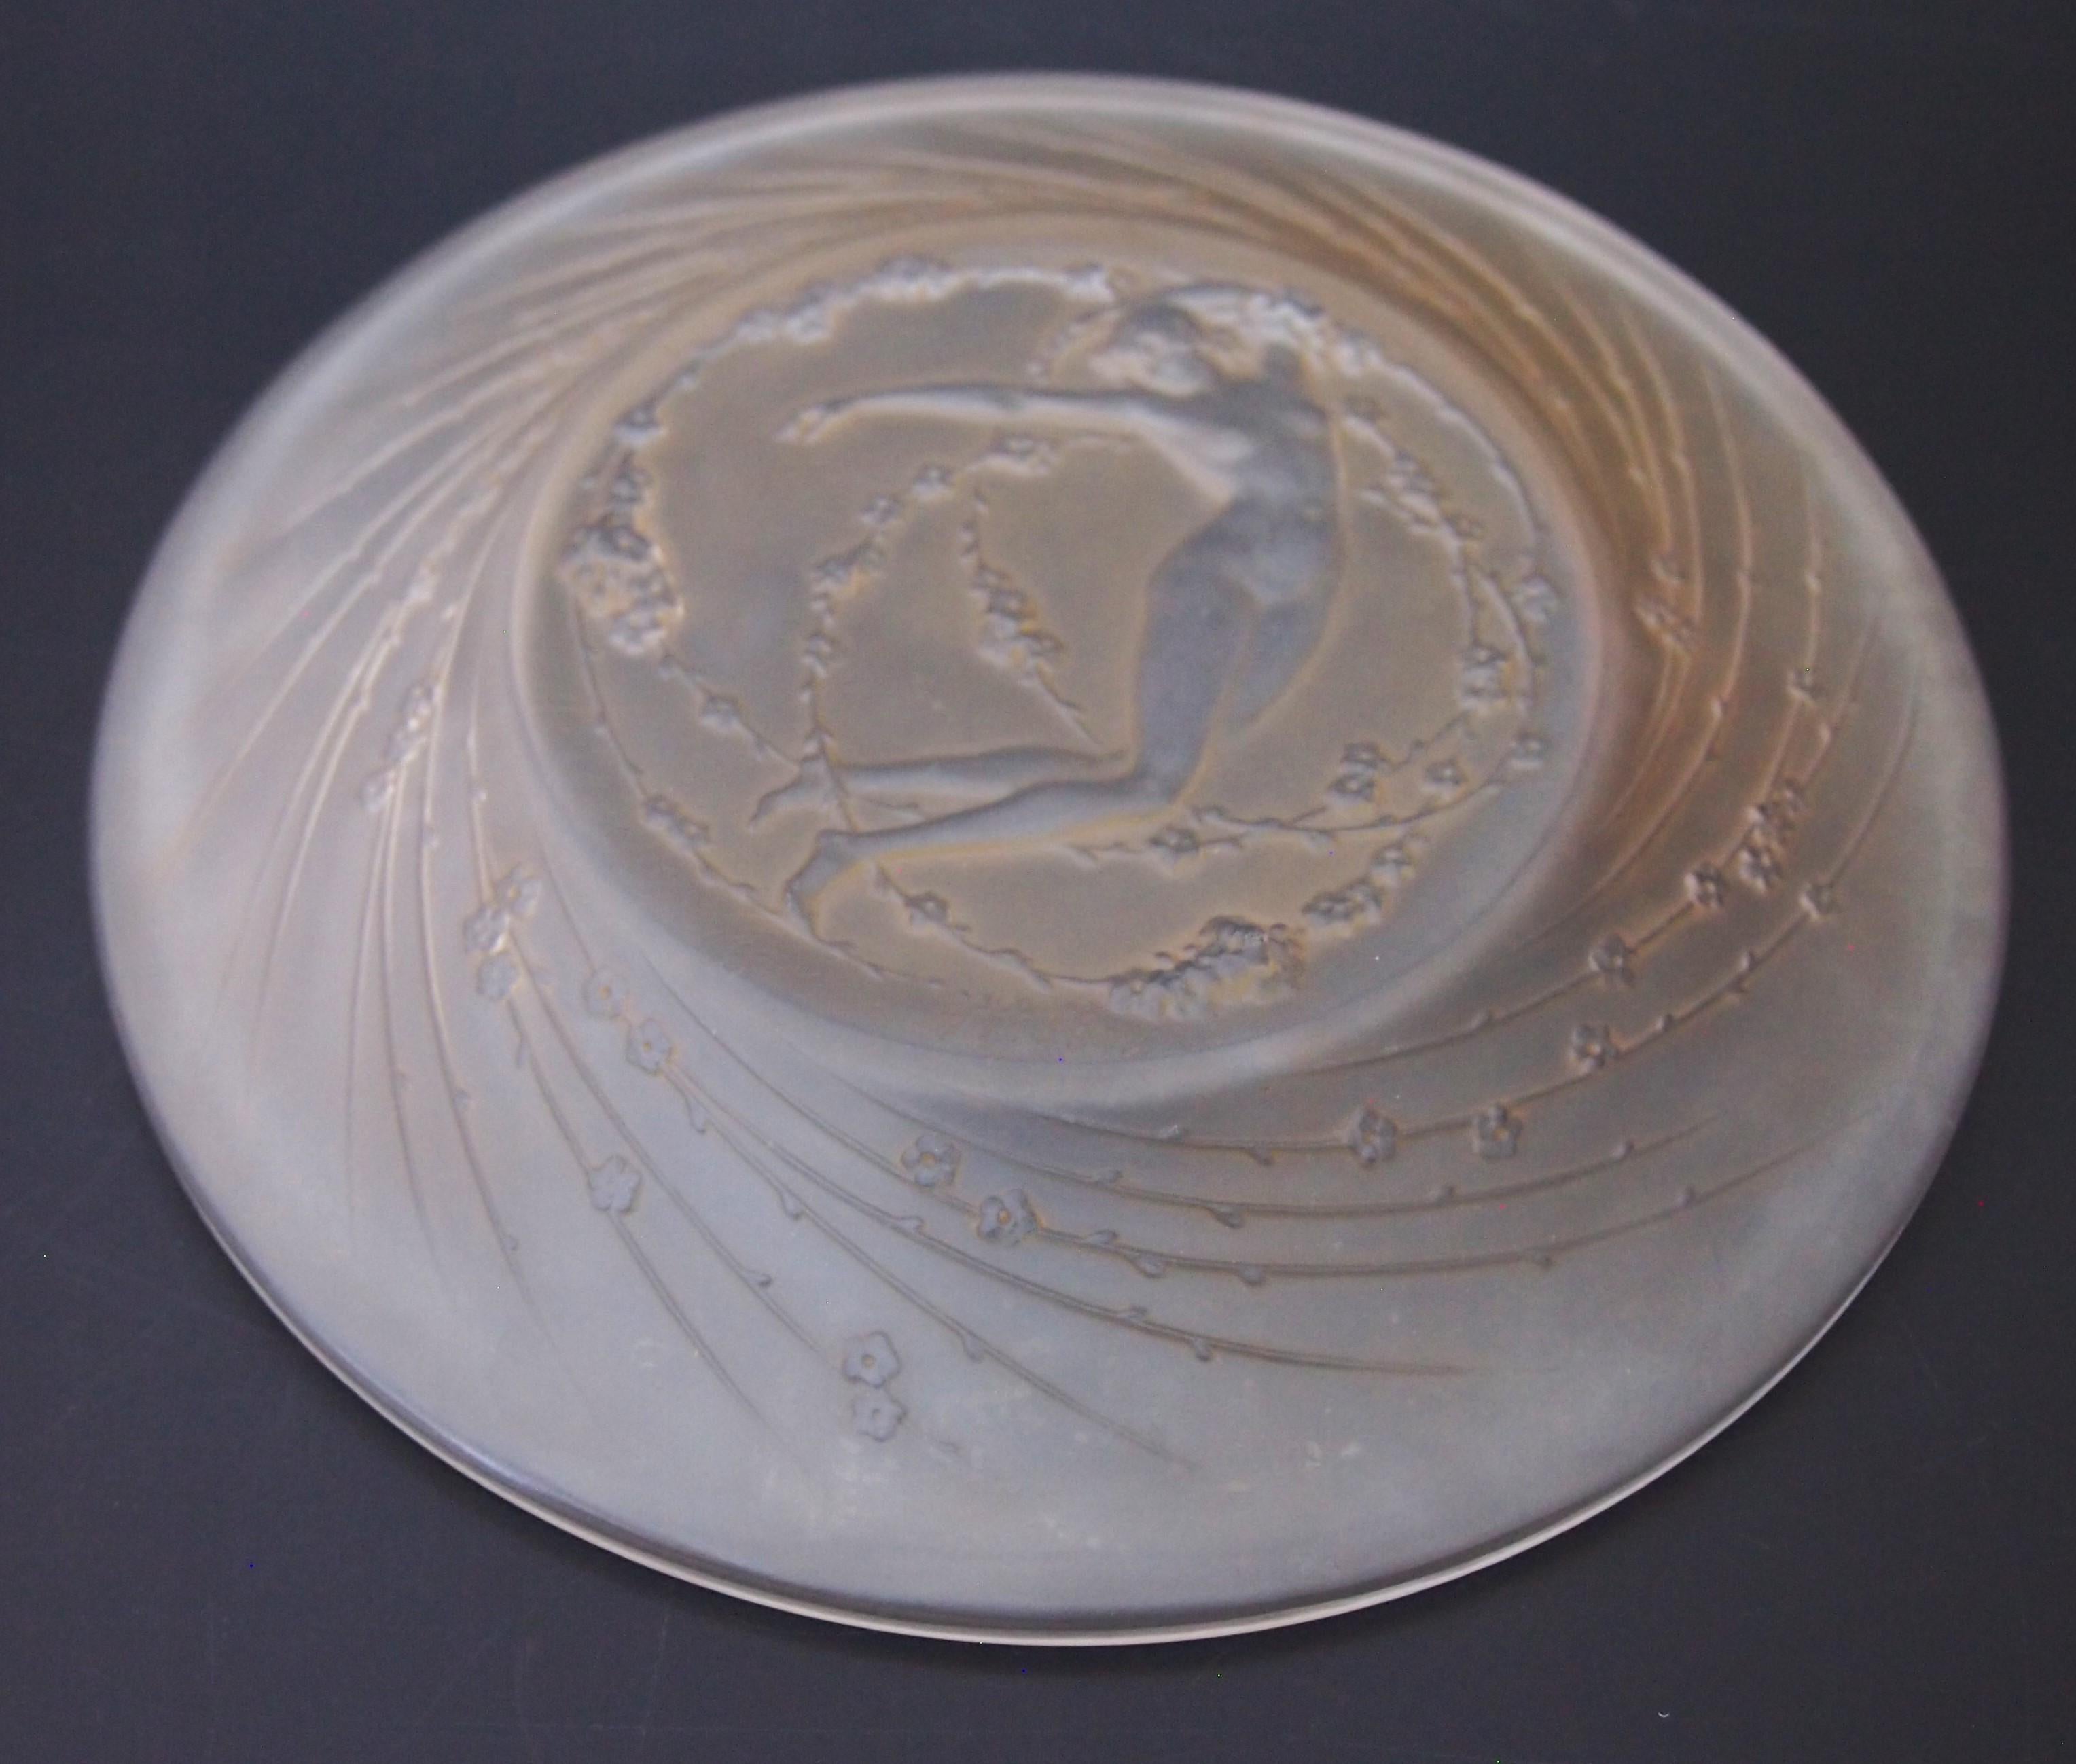 Rene Lalique 'Une Figurine et Fleur' plate signed c1920 -original sepia staining In Good Condition For Sale In Worcester Park, GB